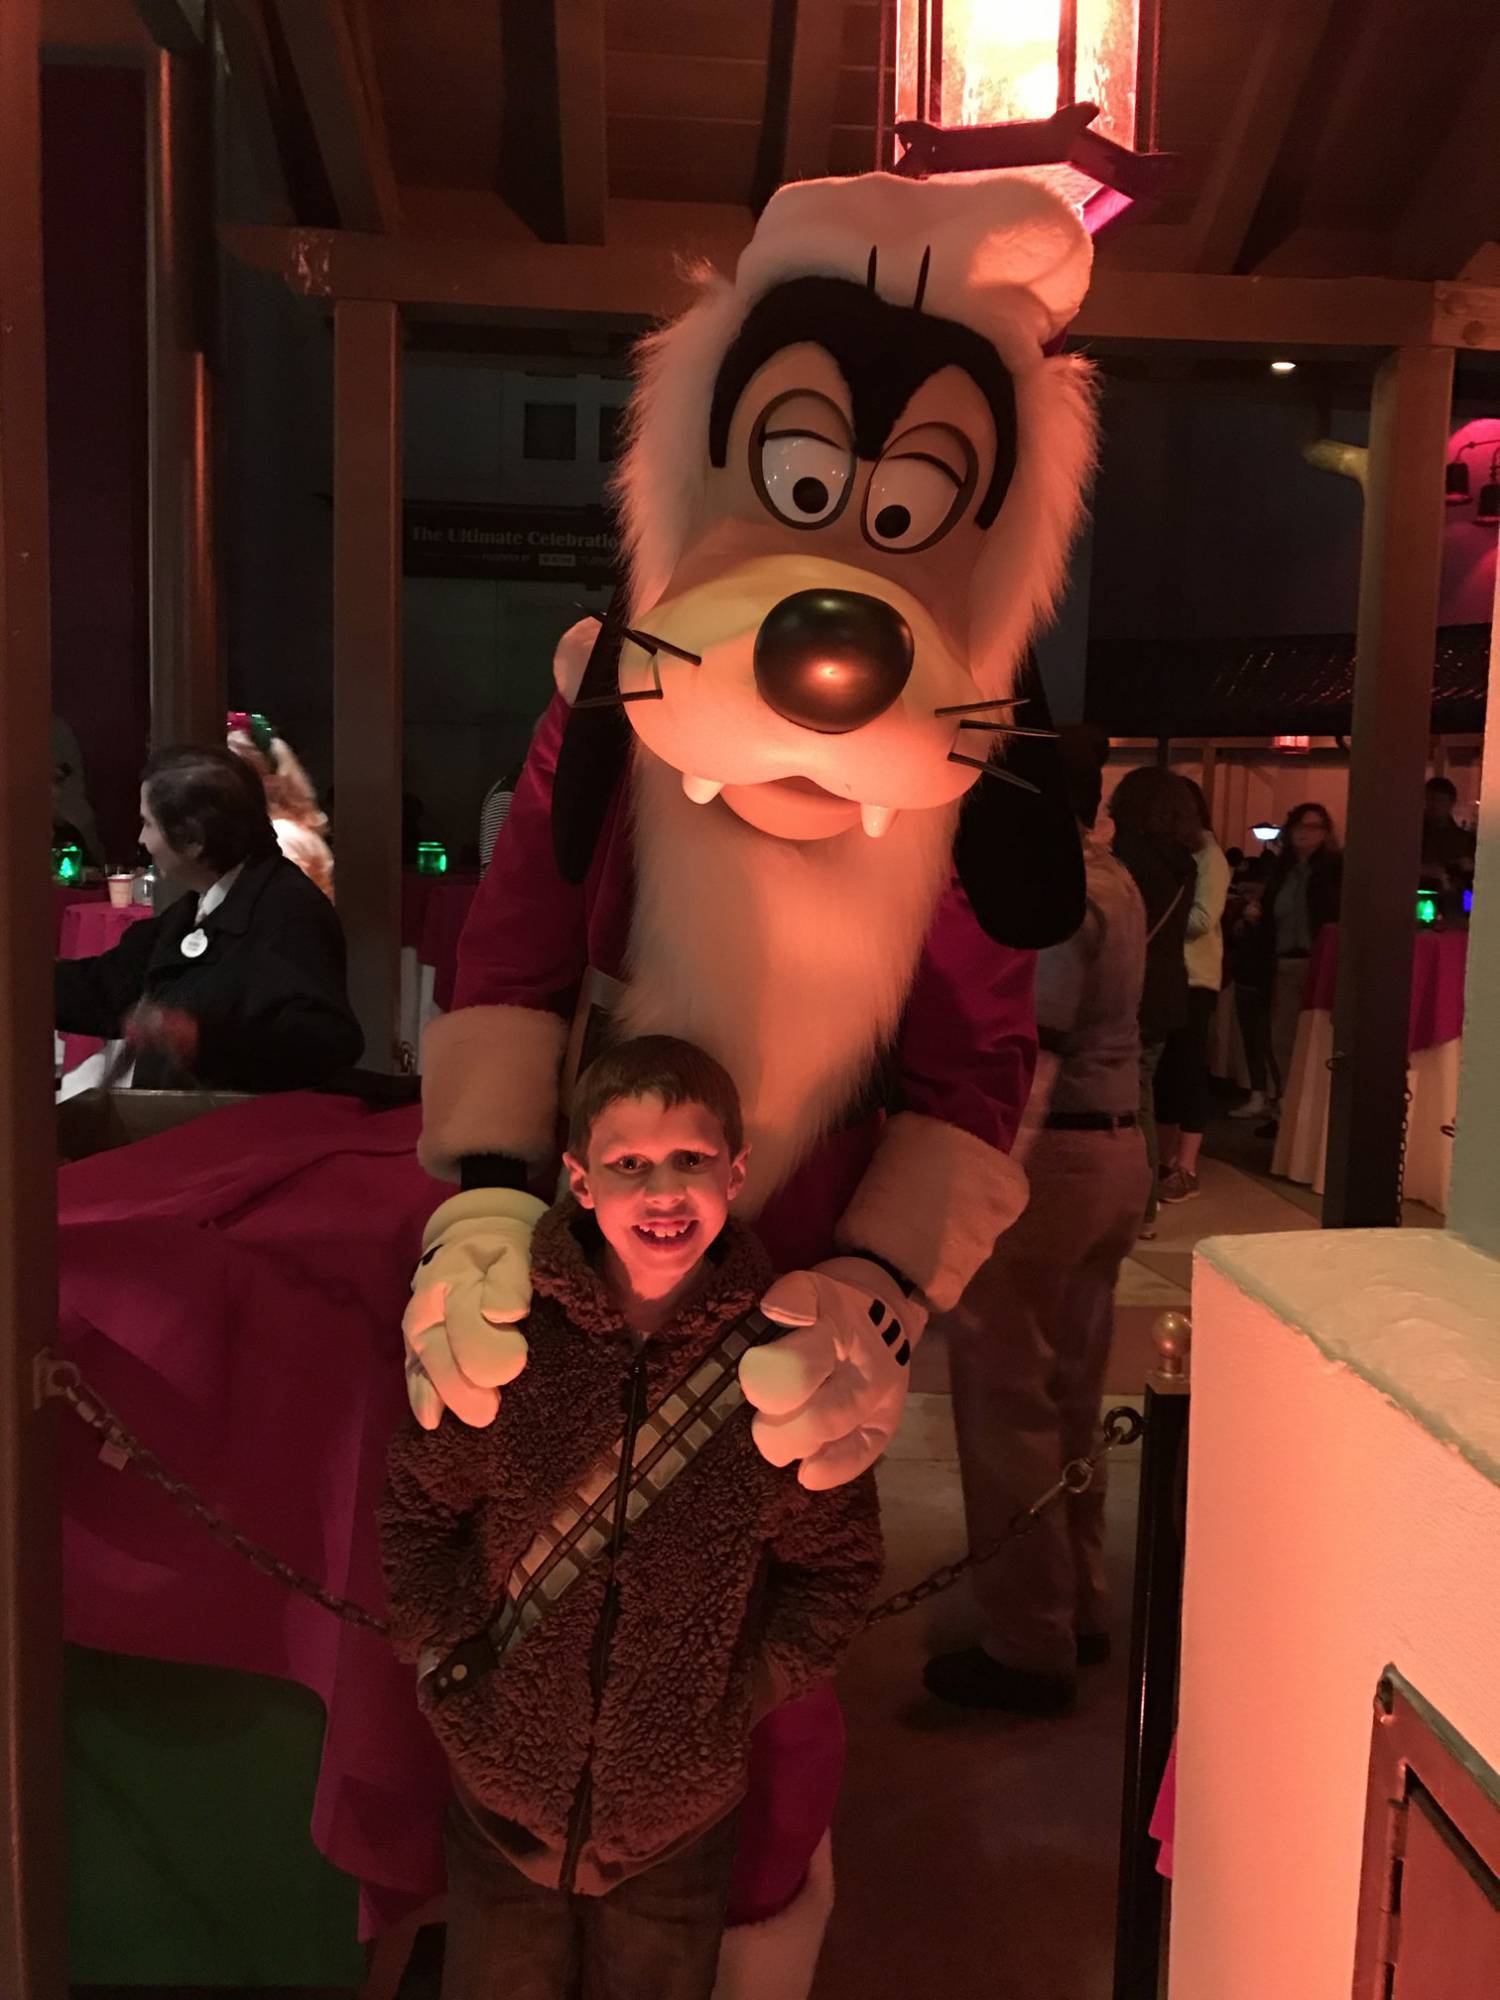 A review of the Jingle Bell, Jingle BAM! Holiday Dessert Party | PassPorter.com